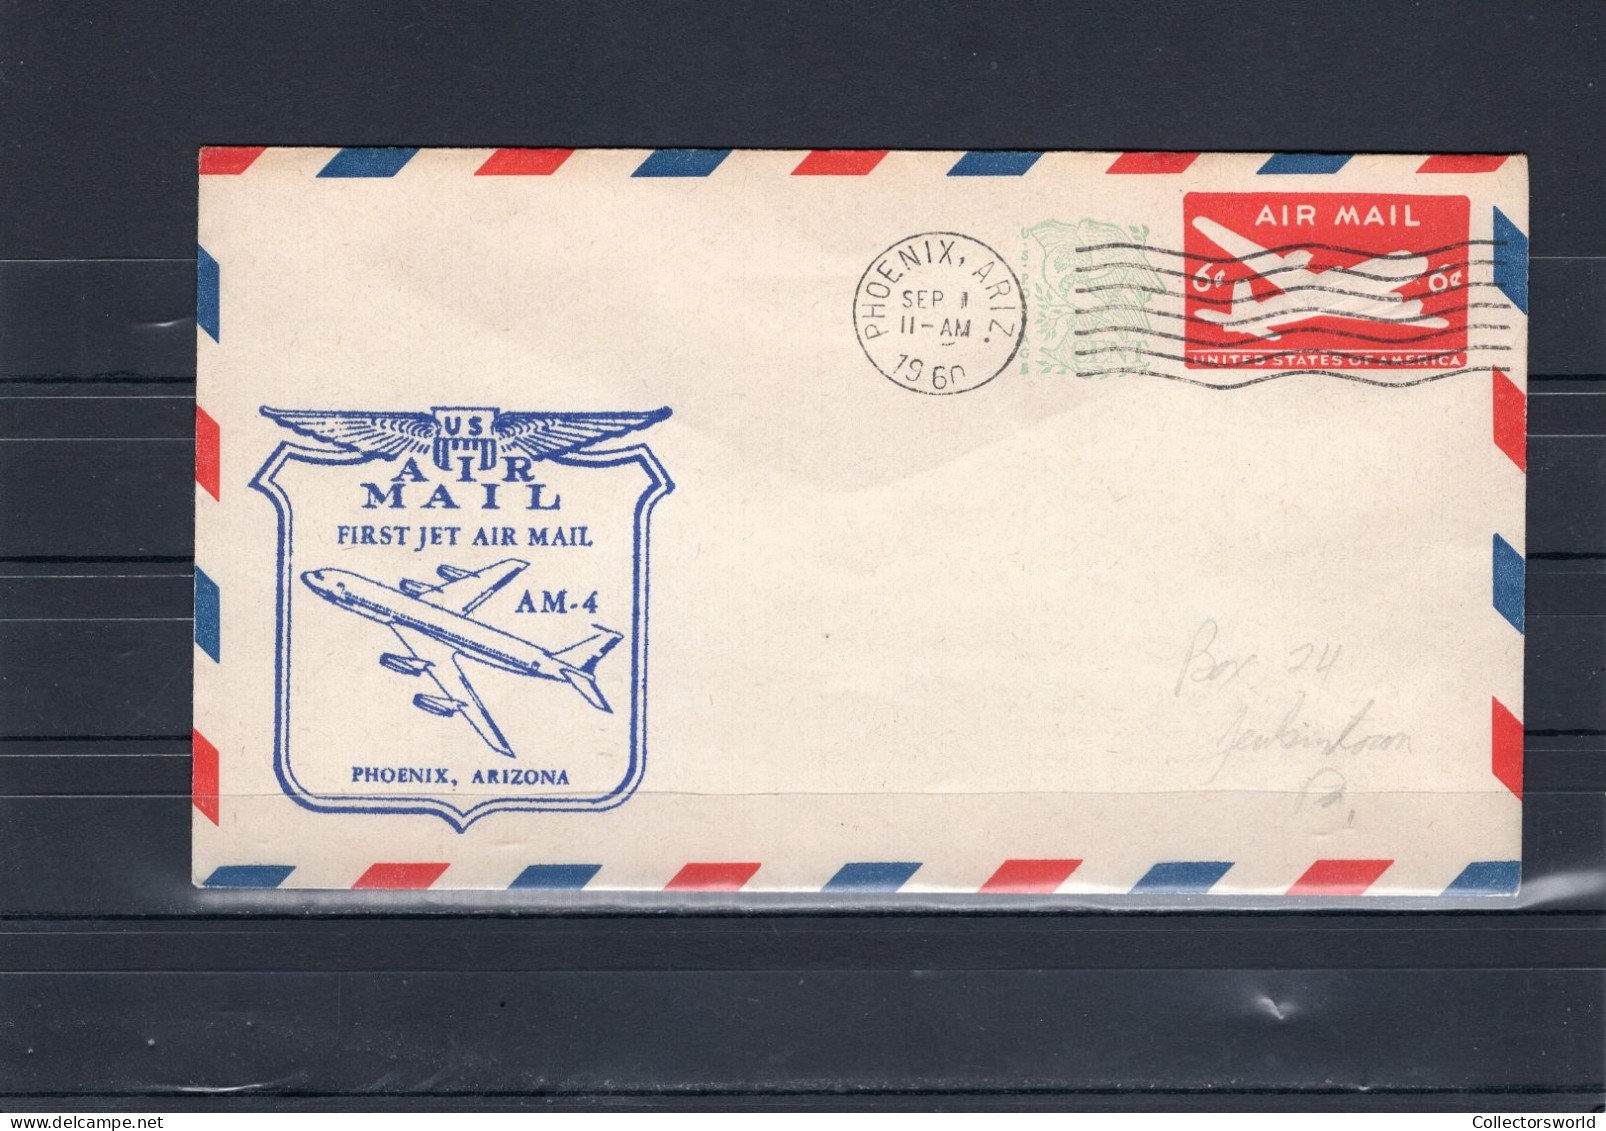 USA 1960 First Flight Cover First Jet Air Mail AM4 Phoenix, Arizona (Chicago Arrival Stamp On The Back) Embossed 6c - Schmuck-FDC